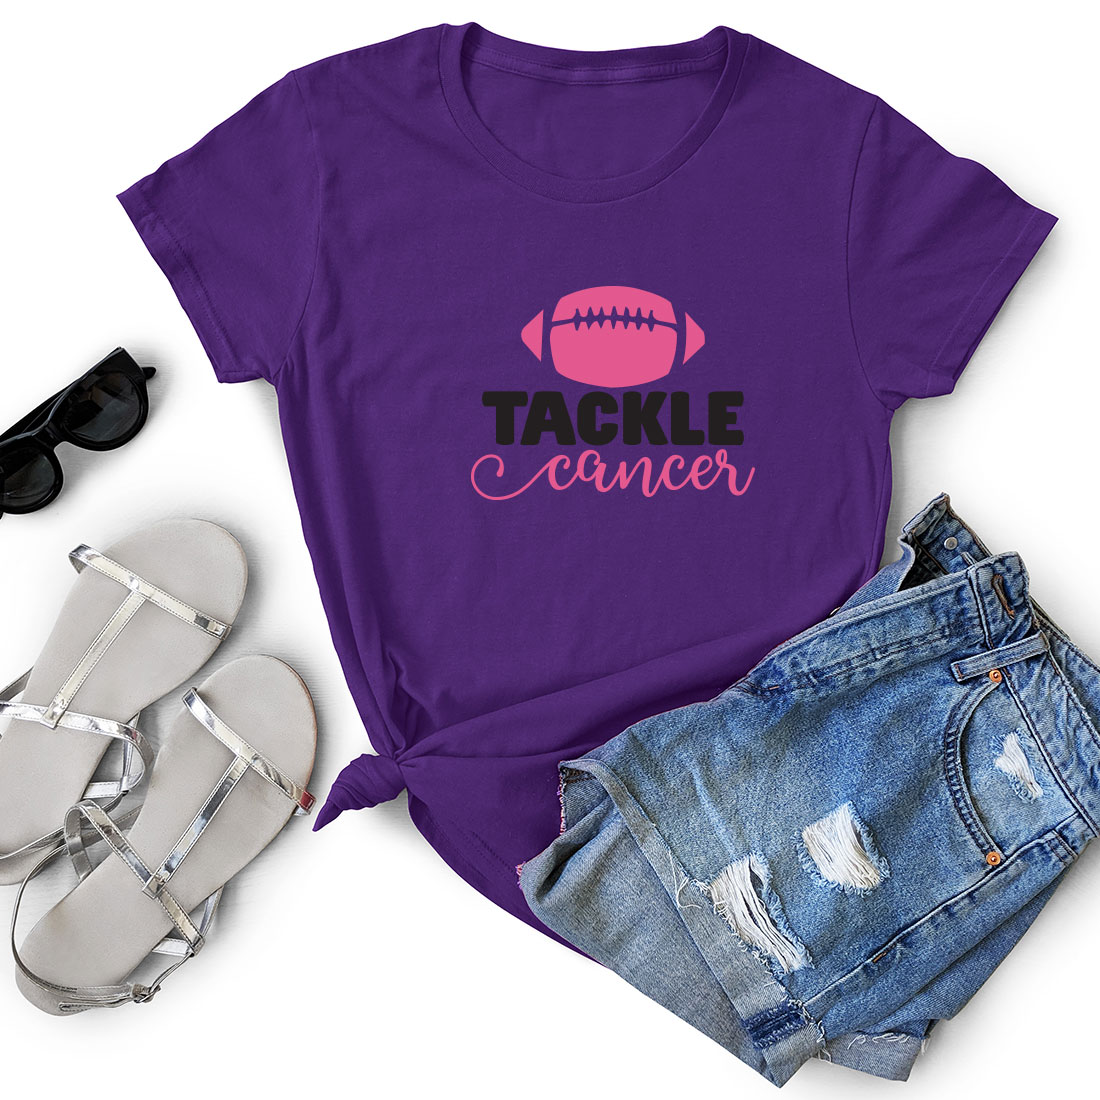 Purple shirt that says tackle cancer with a football on it.